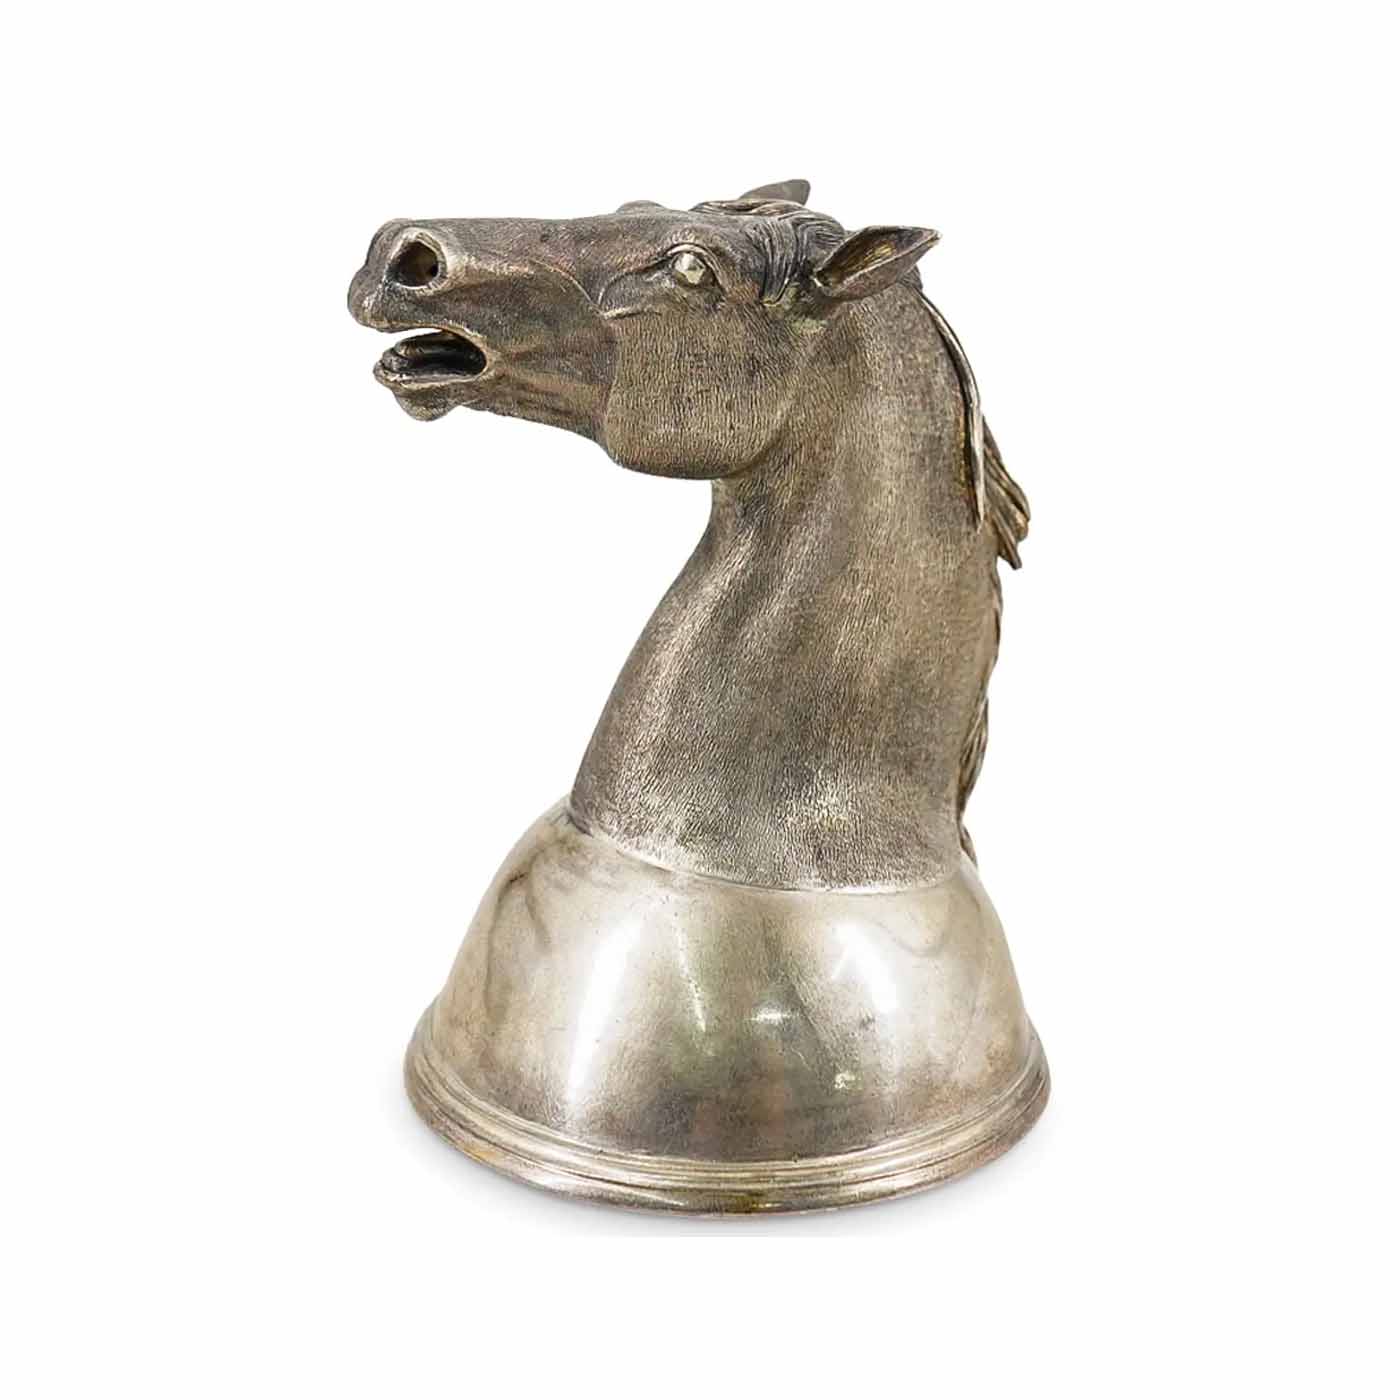 Russian 875 Silver Horse Head Stirrup Cup, estimated at $2,000-$4,000 at Akiba.